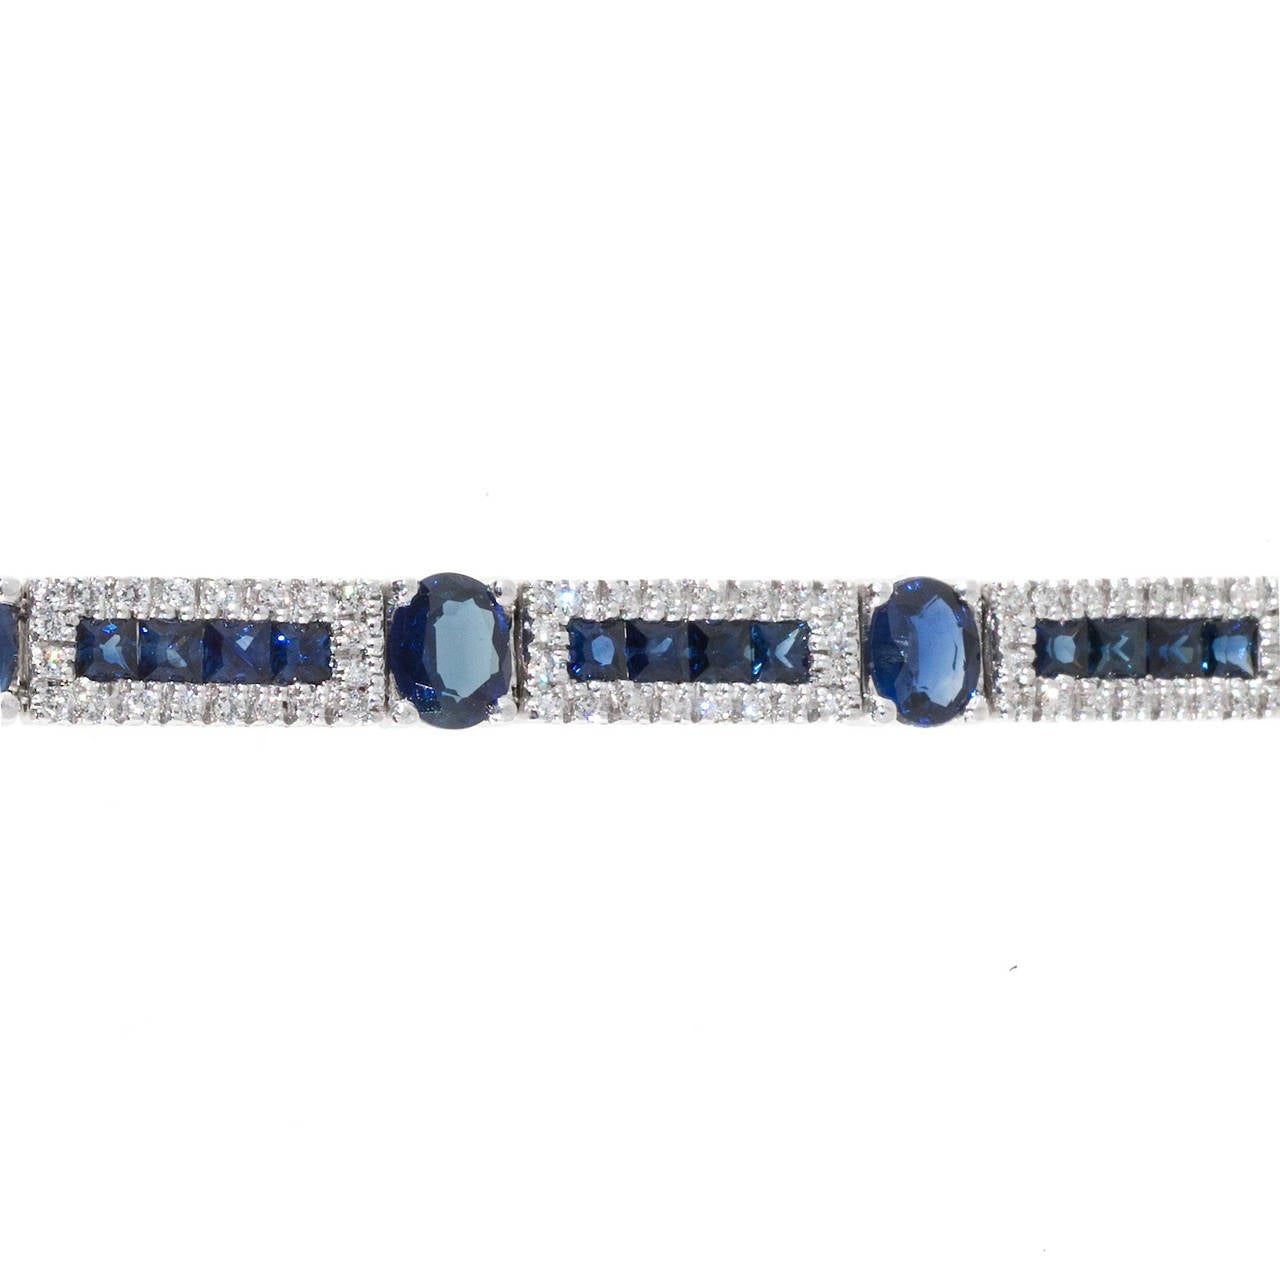 Beautiful hinged link white gold bracelet signed ML set with bright blue square and oval Sapphires and nice diamond accents. Built in hidden catch with double side lock safety. Circa 1970 -1980.

12 oval deep blue Sapphires, approx. total weight